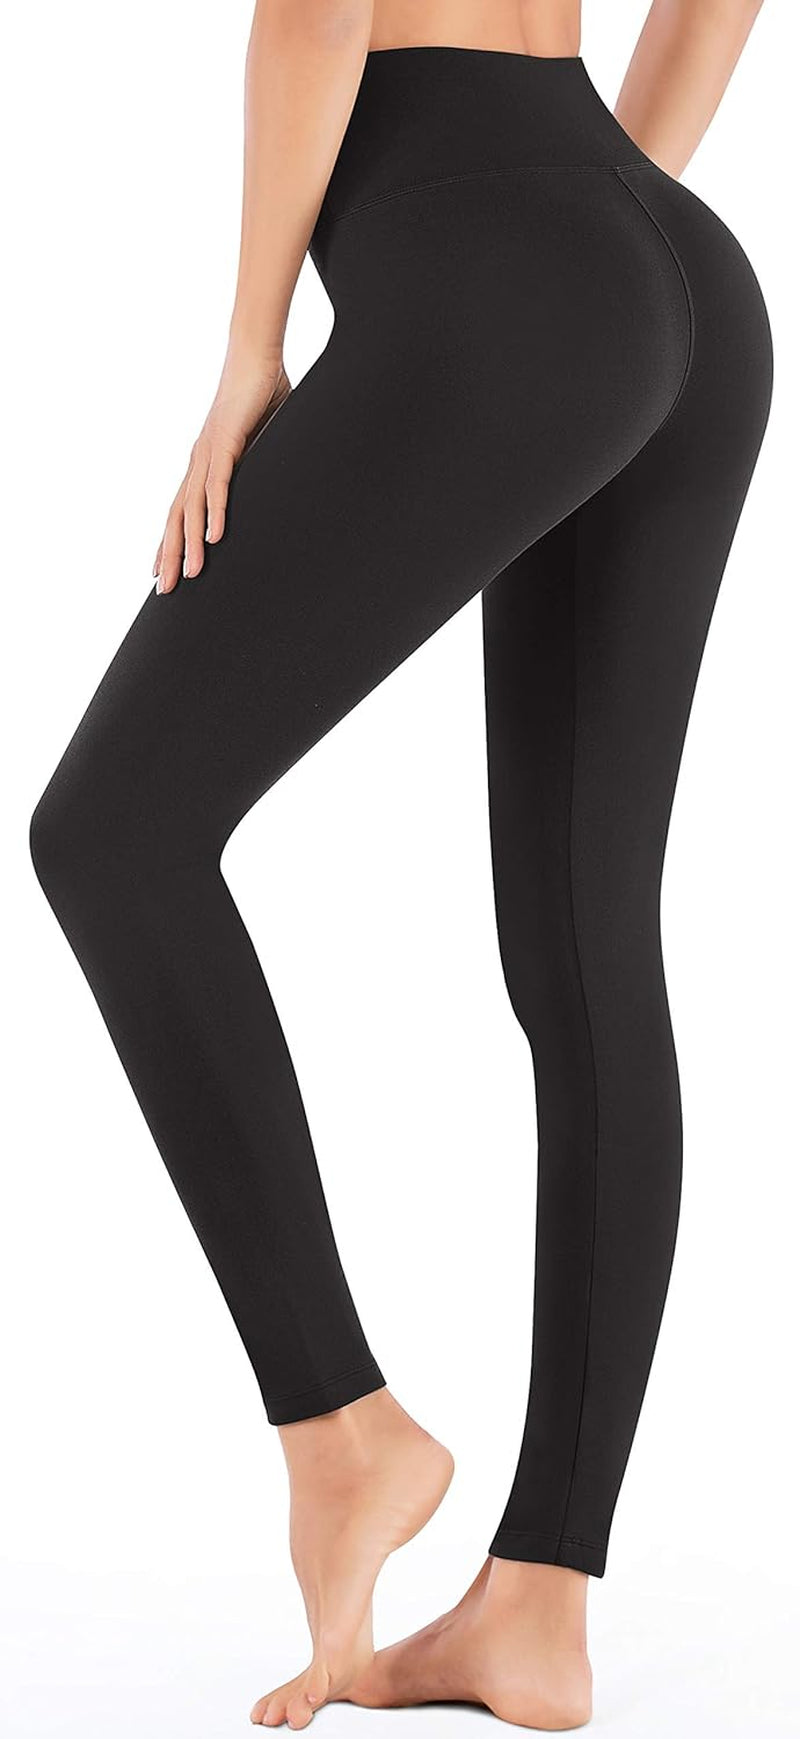 Enhance Your Workout Experience with High Waisted Leggings - Stay Stylish and Comfortable While You Sweat!